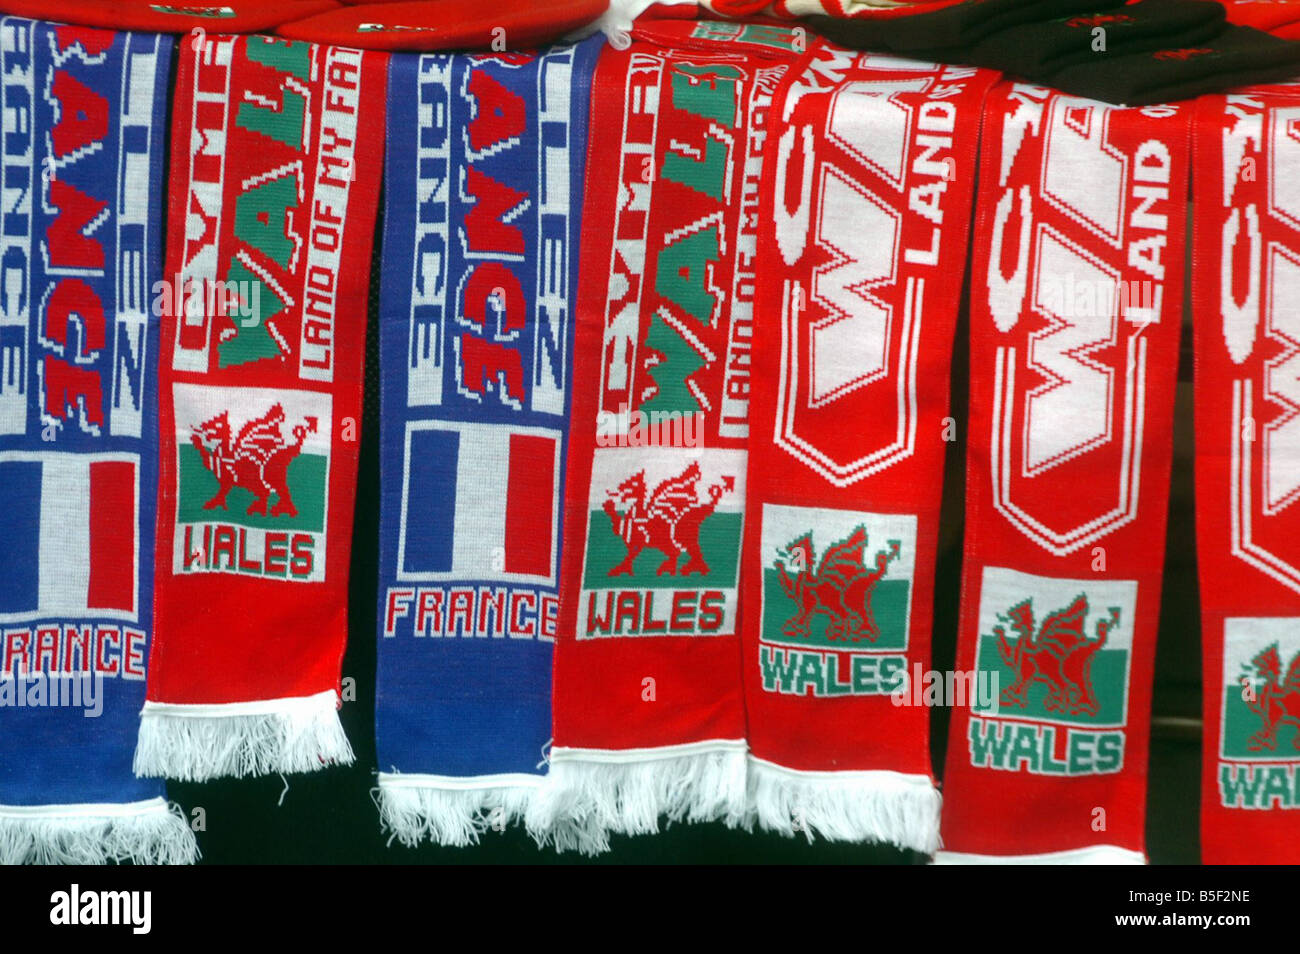 Sport Rugby Wales v France MEDIA WALES DAVIES Rugby scarves on sale in  Cardiff city centre on Grand Slam Day when Wales played France 15th March  2008 Stock Photo - Alamy